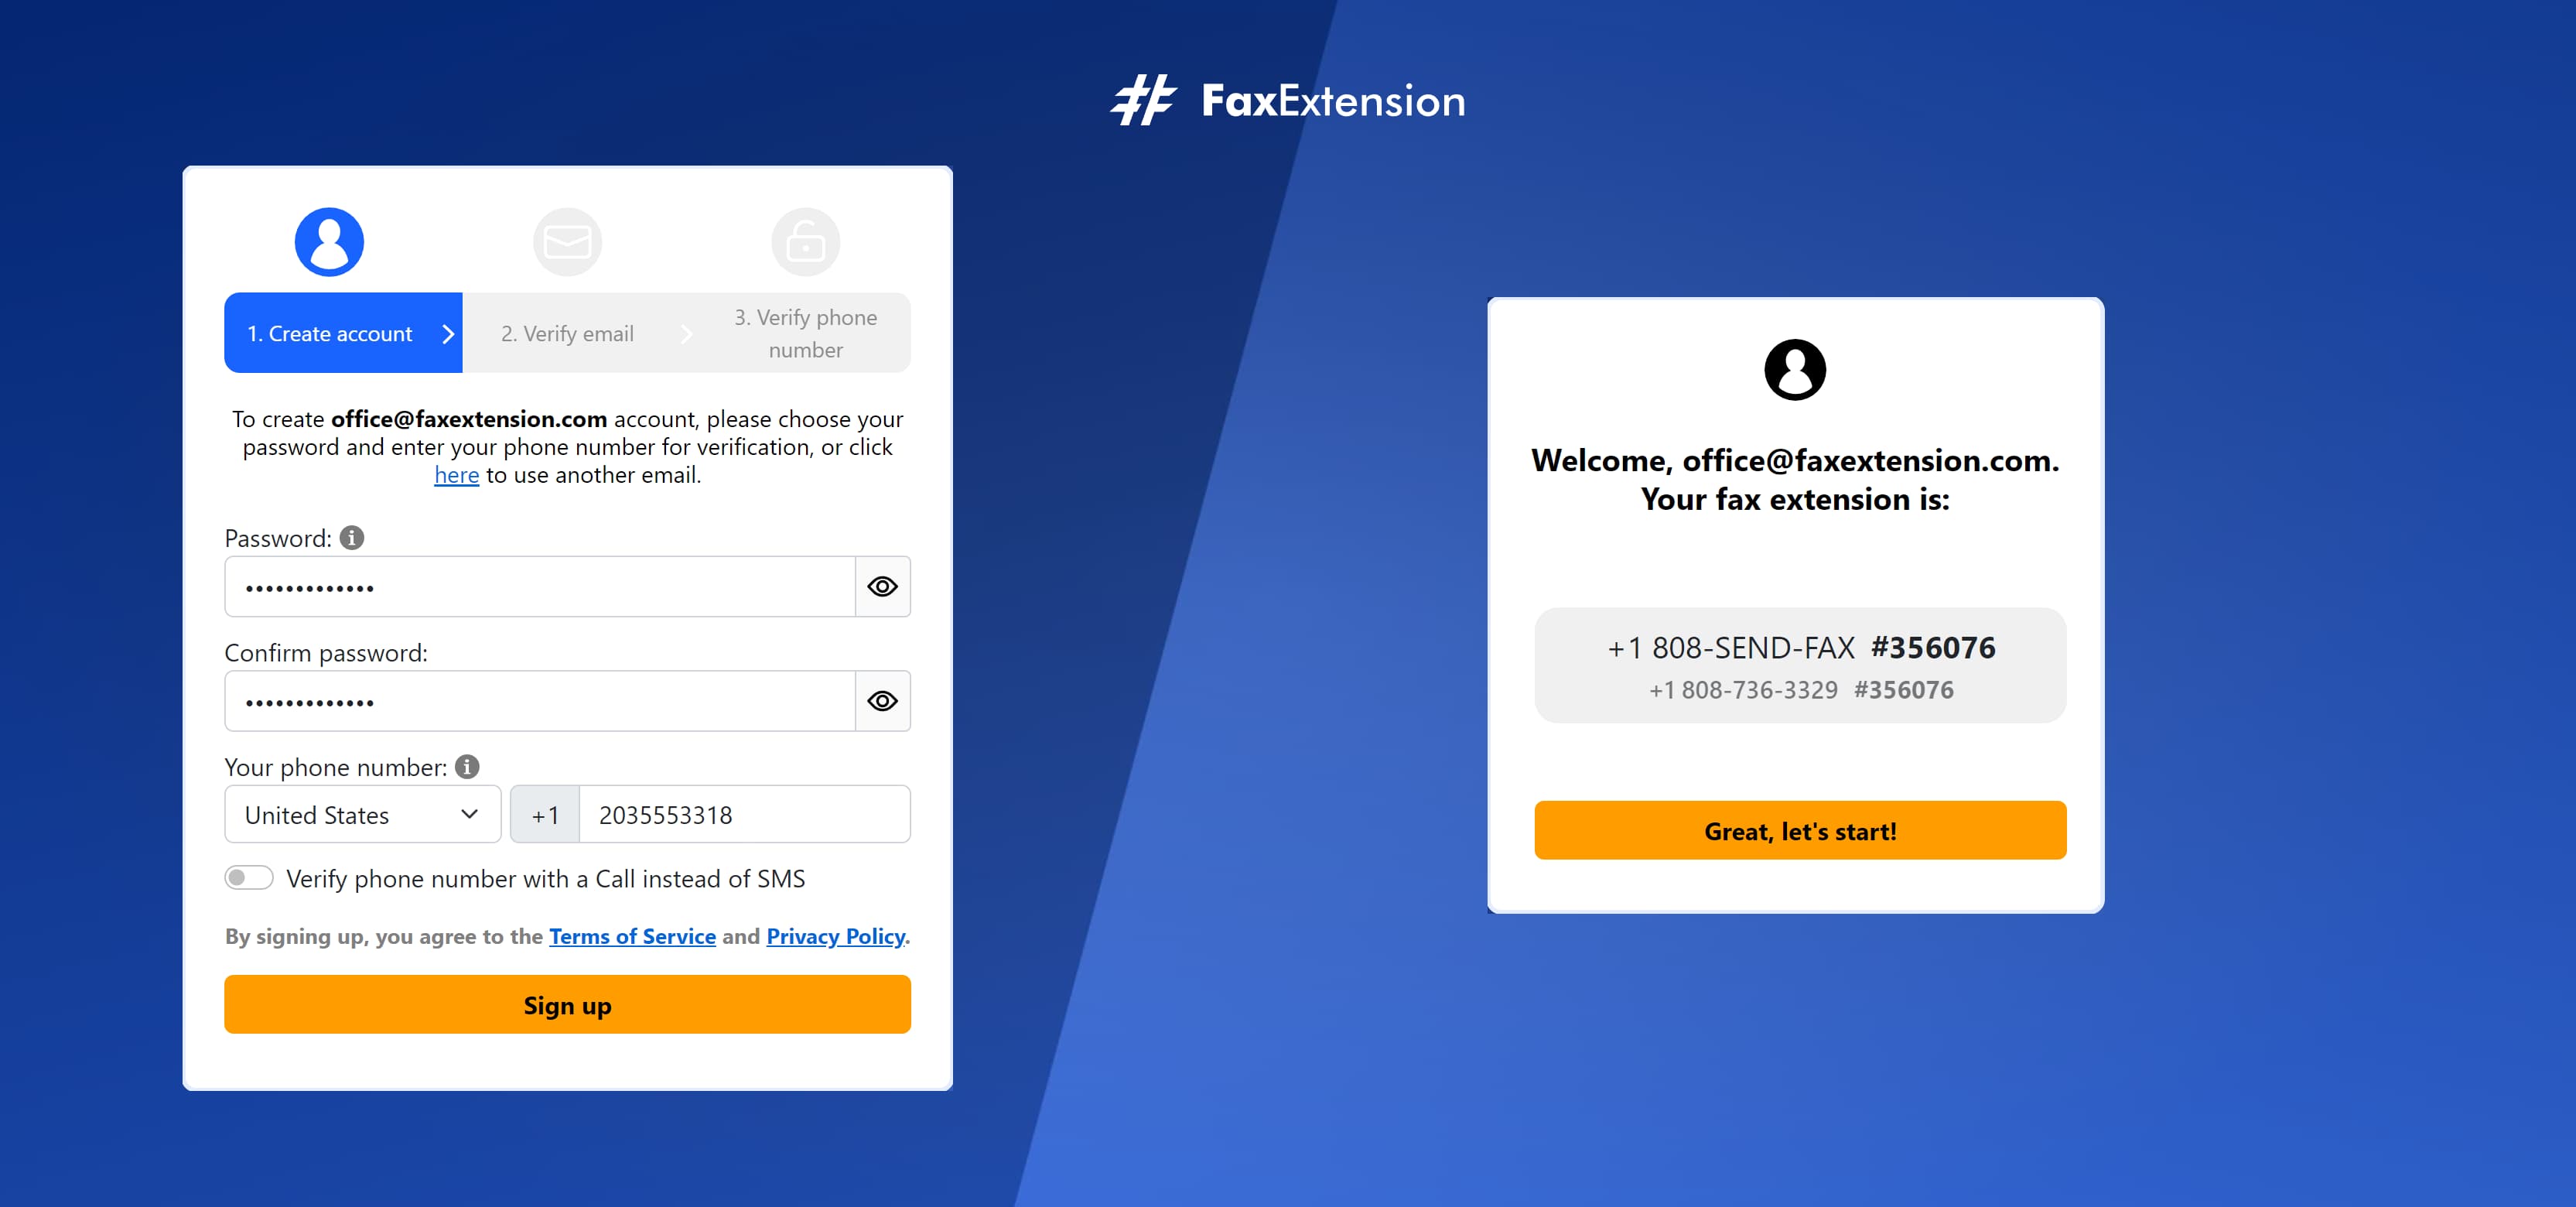 Get your own free fax extension number instantly and send fax by iPhone